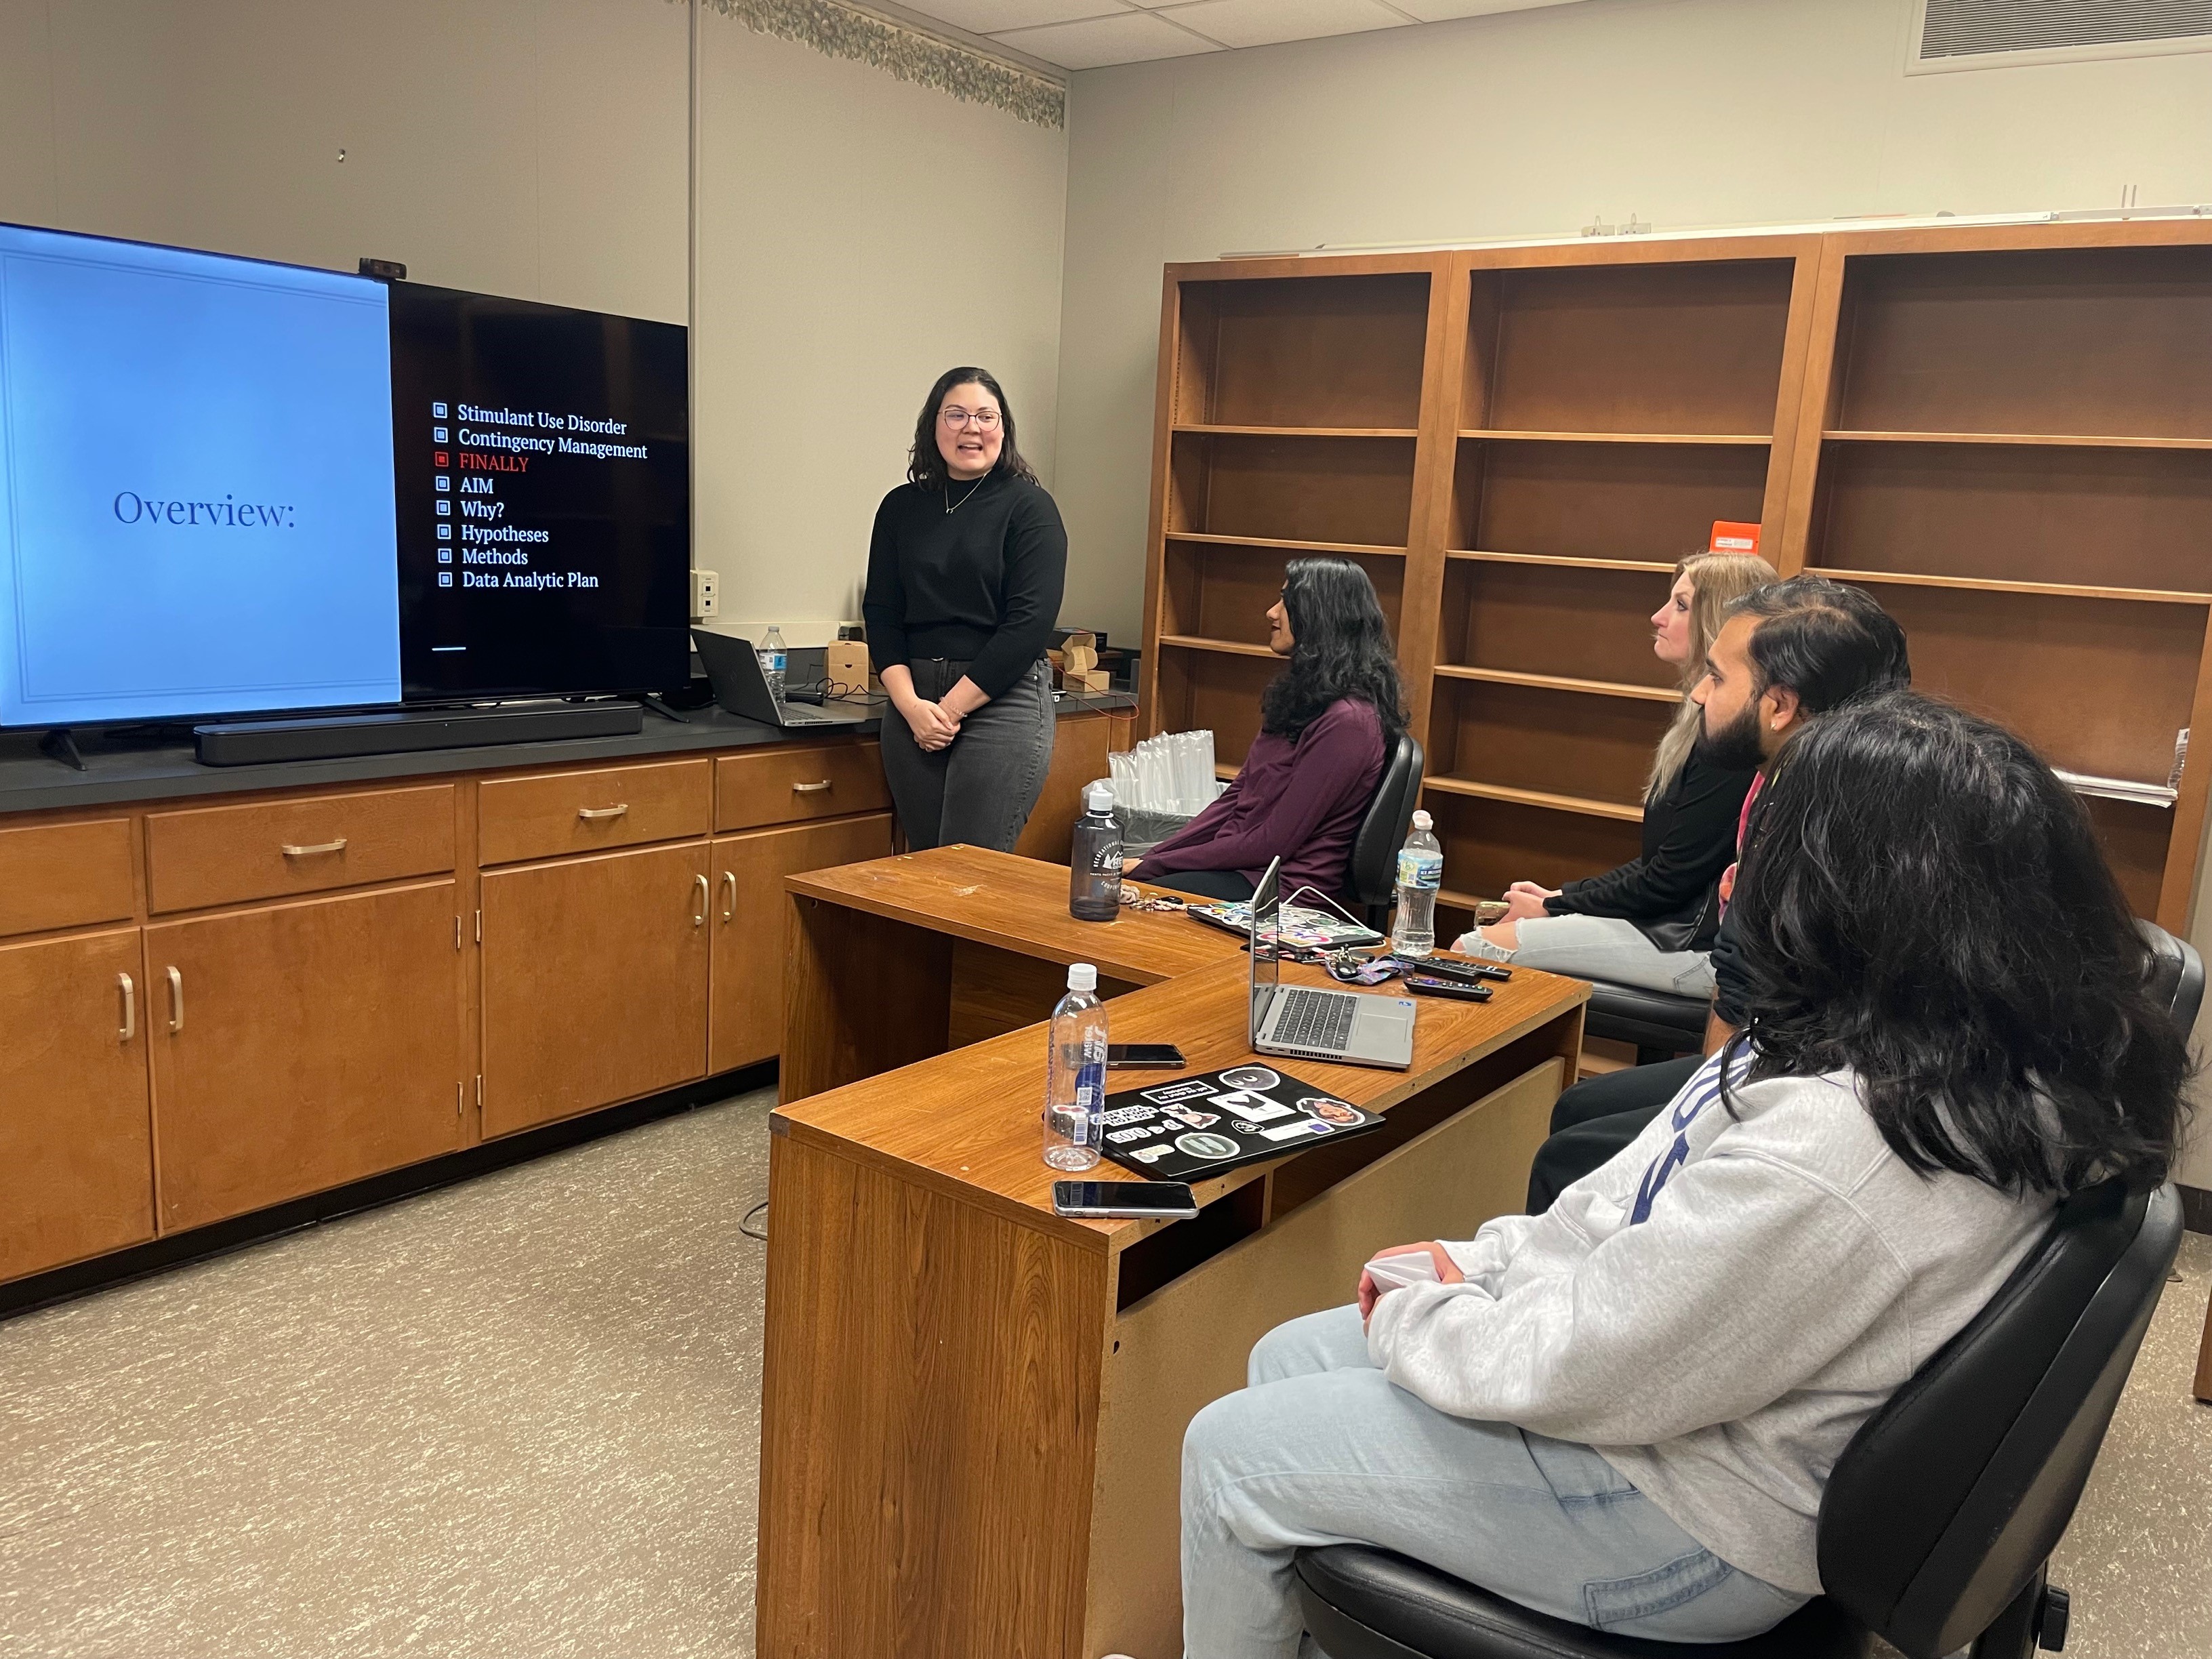 The ASPIRE Lab had its final meeting of the semester where some our lovely members presented their research proposals and used the new tech we have set up!